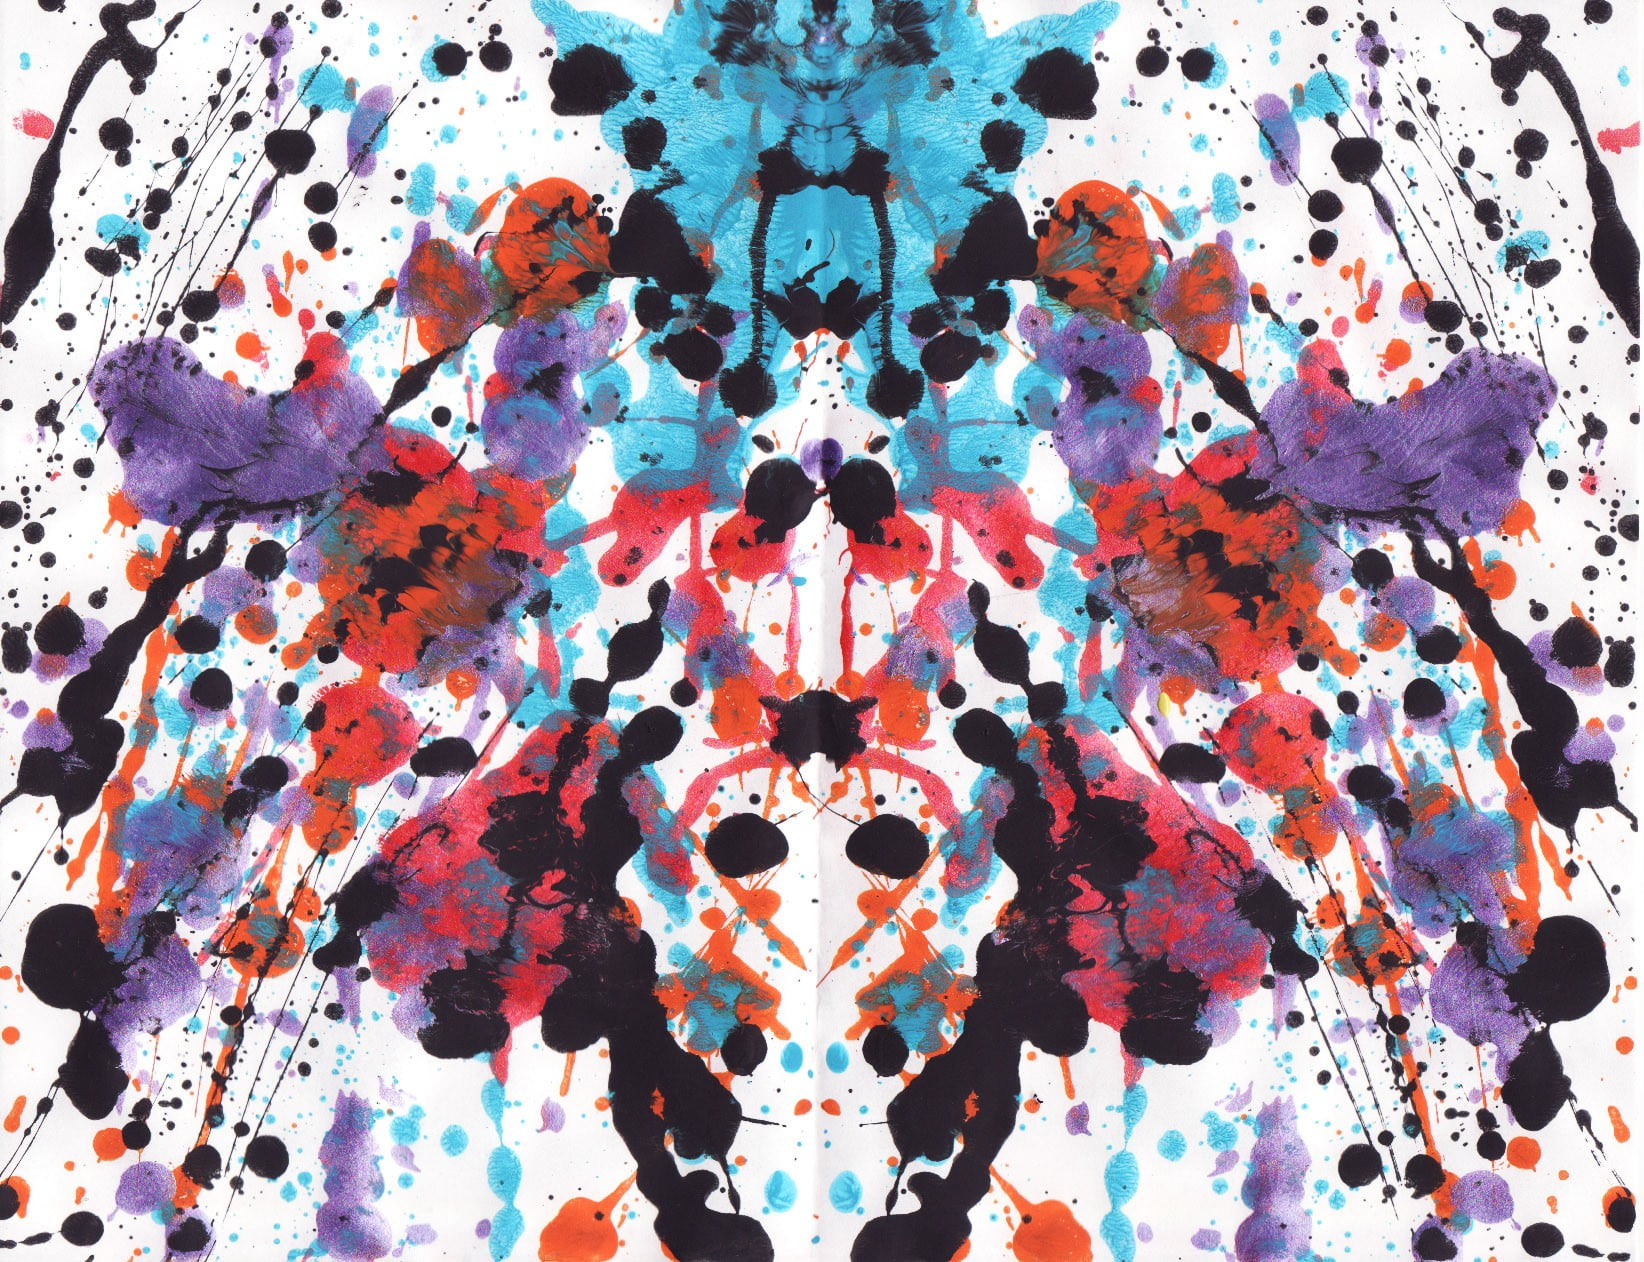 abstract painting, ink, paint splatter, symmetry, Rorschach test